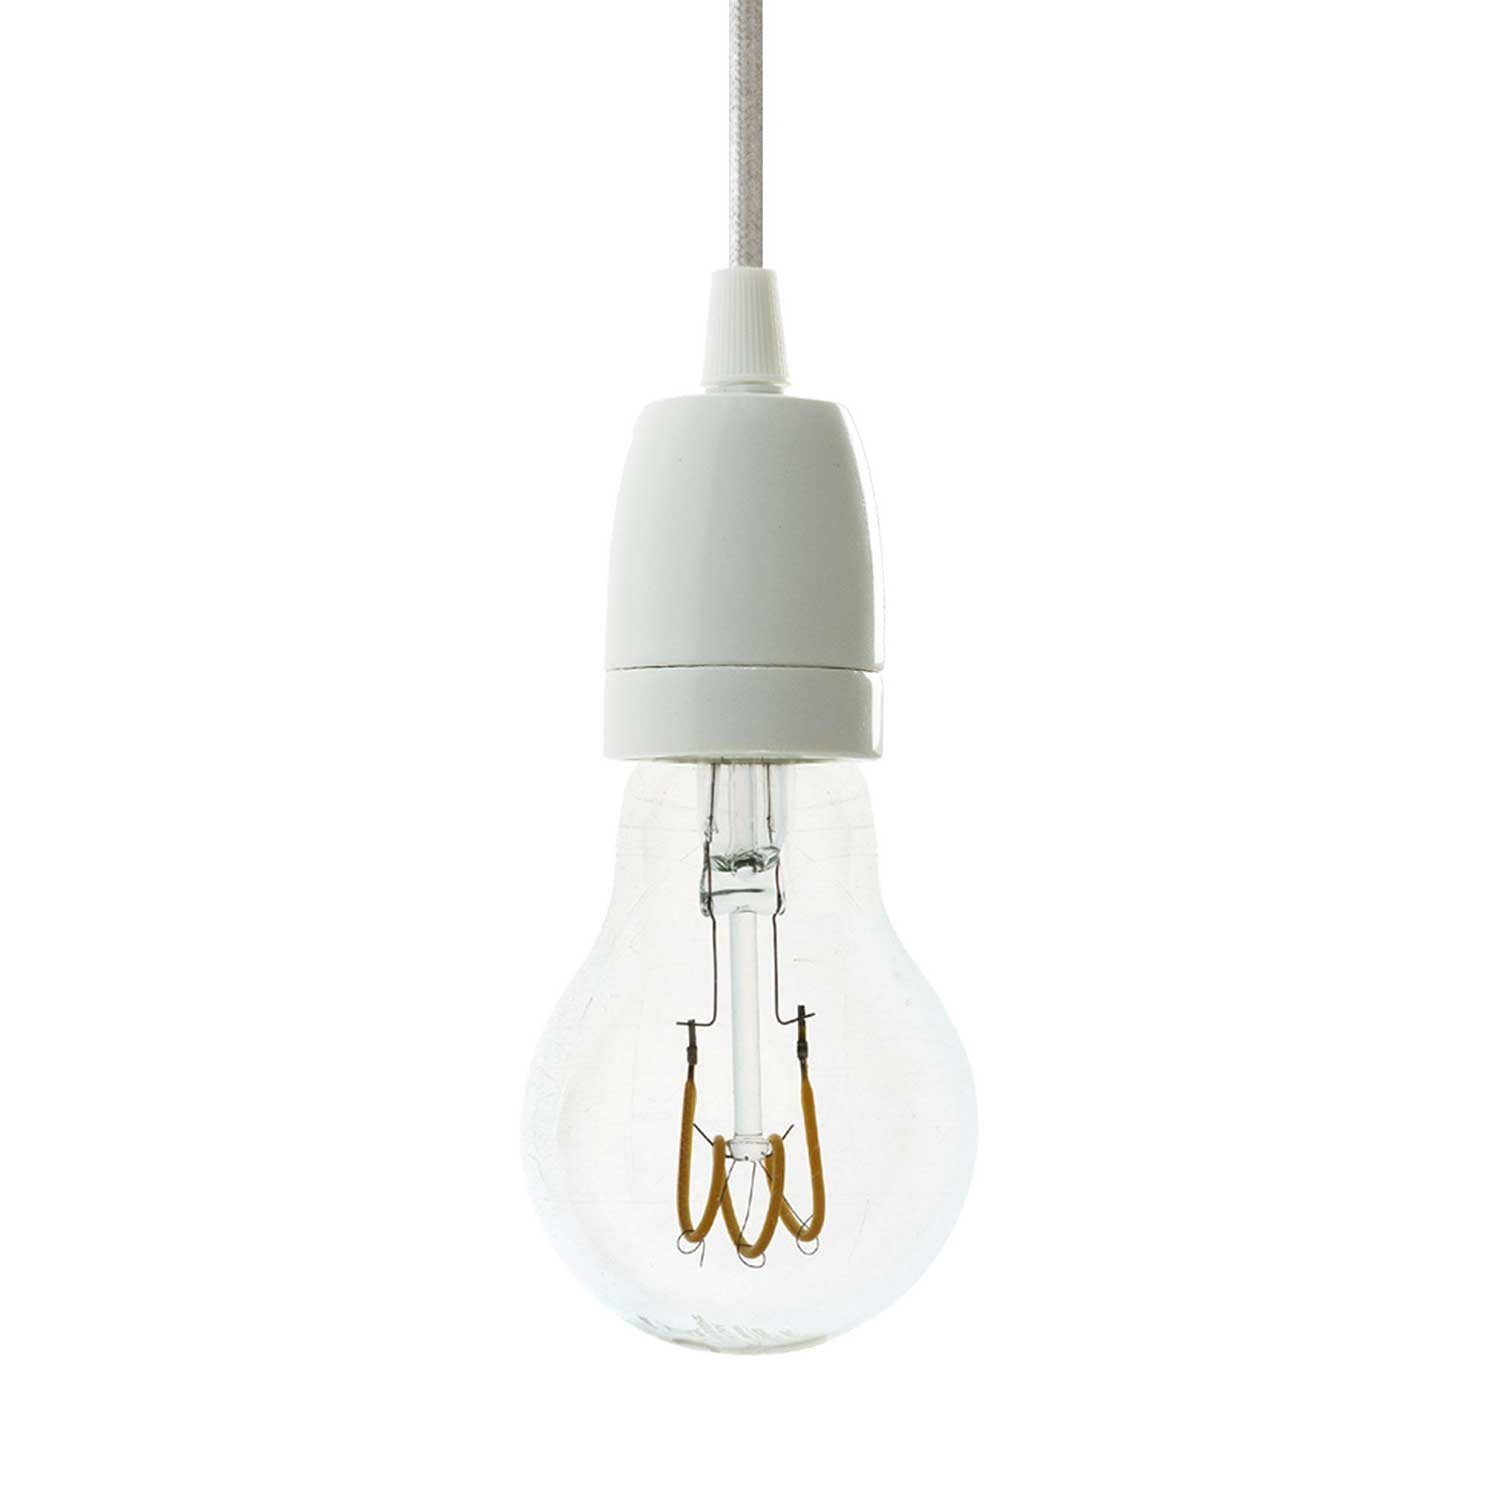 Pendant lamp with textile cable and coloured porcelain details - Made in Italy